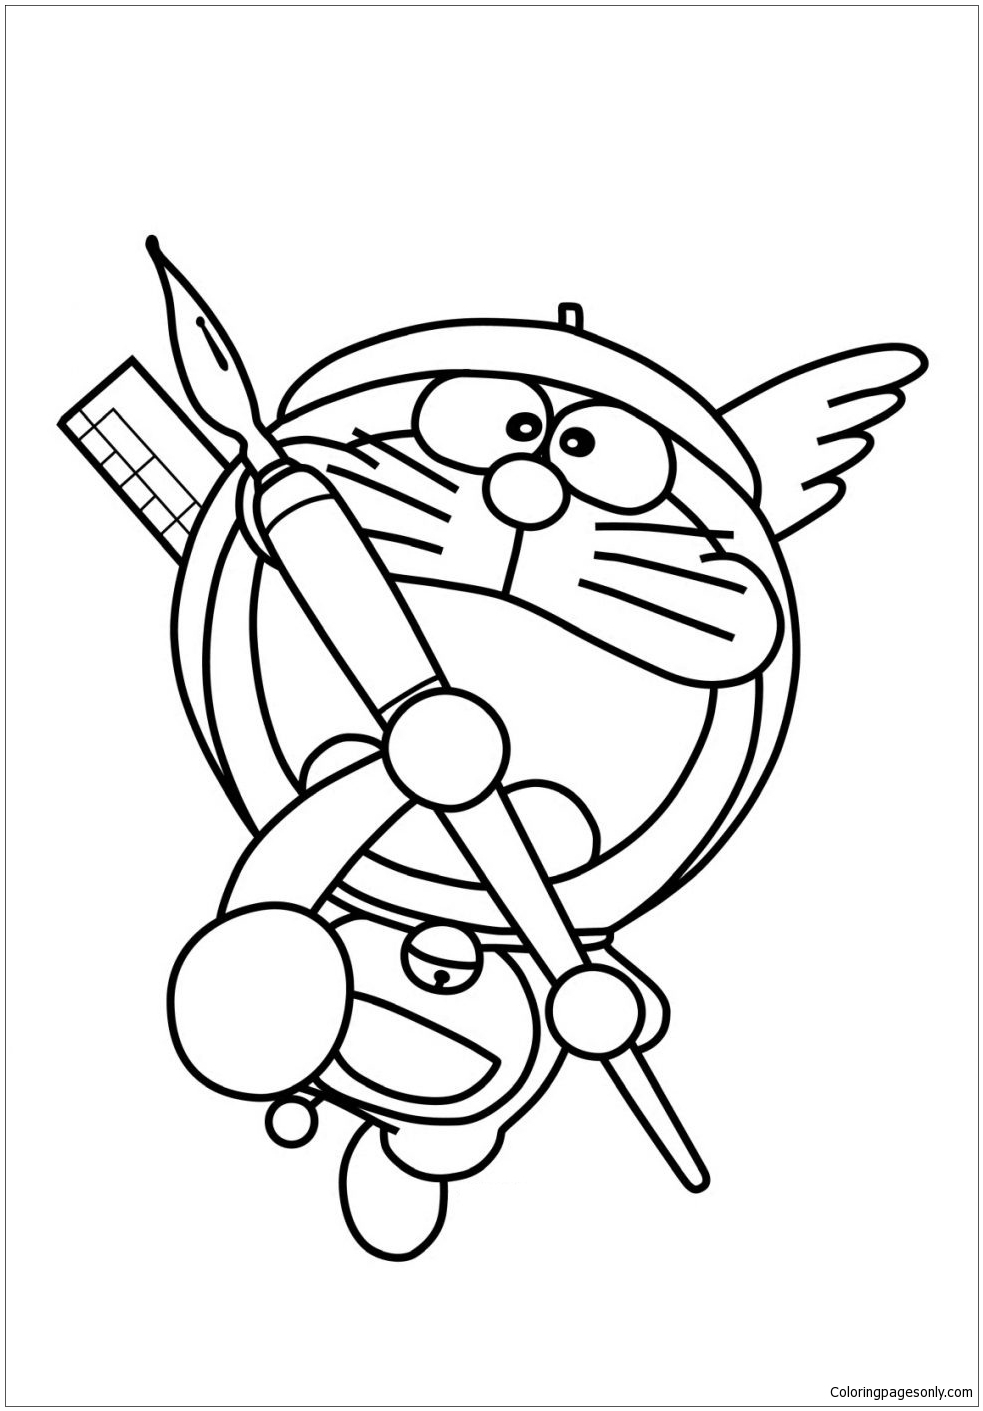 Stunning Doraemon Coloring Page Free Coloring Pages Online